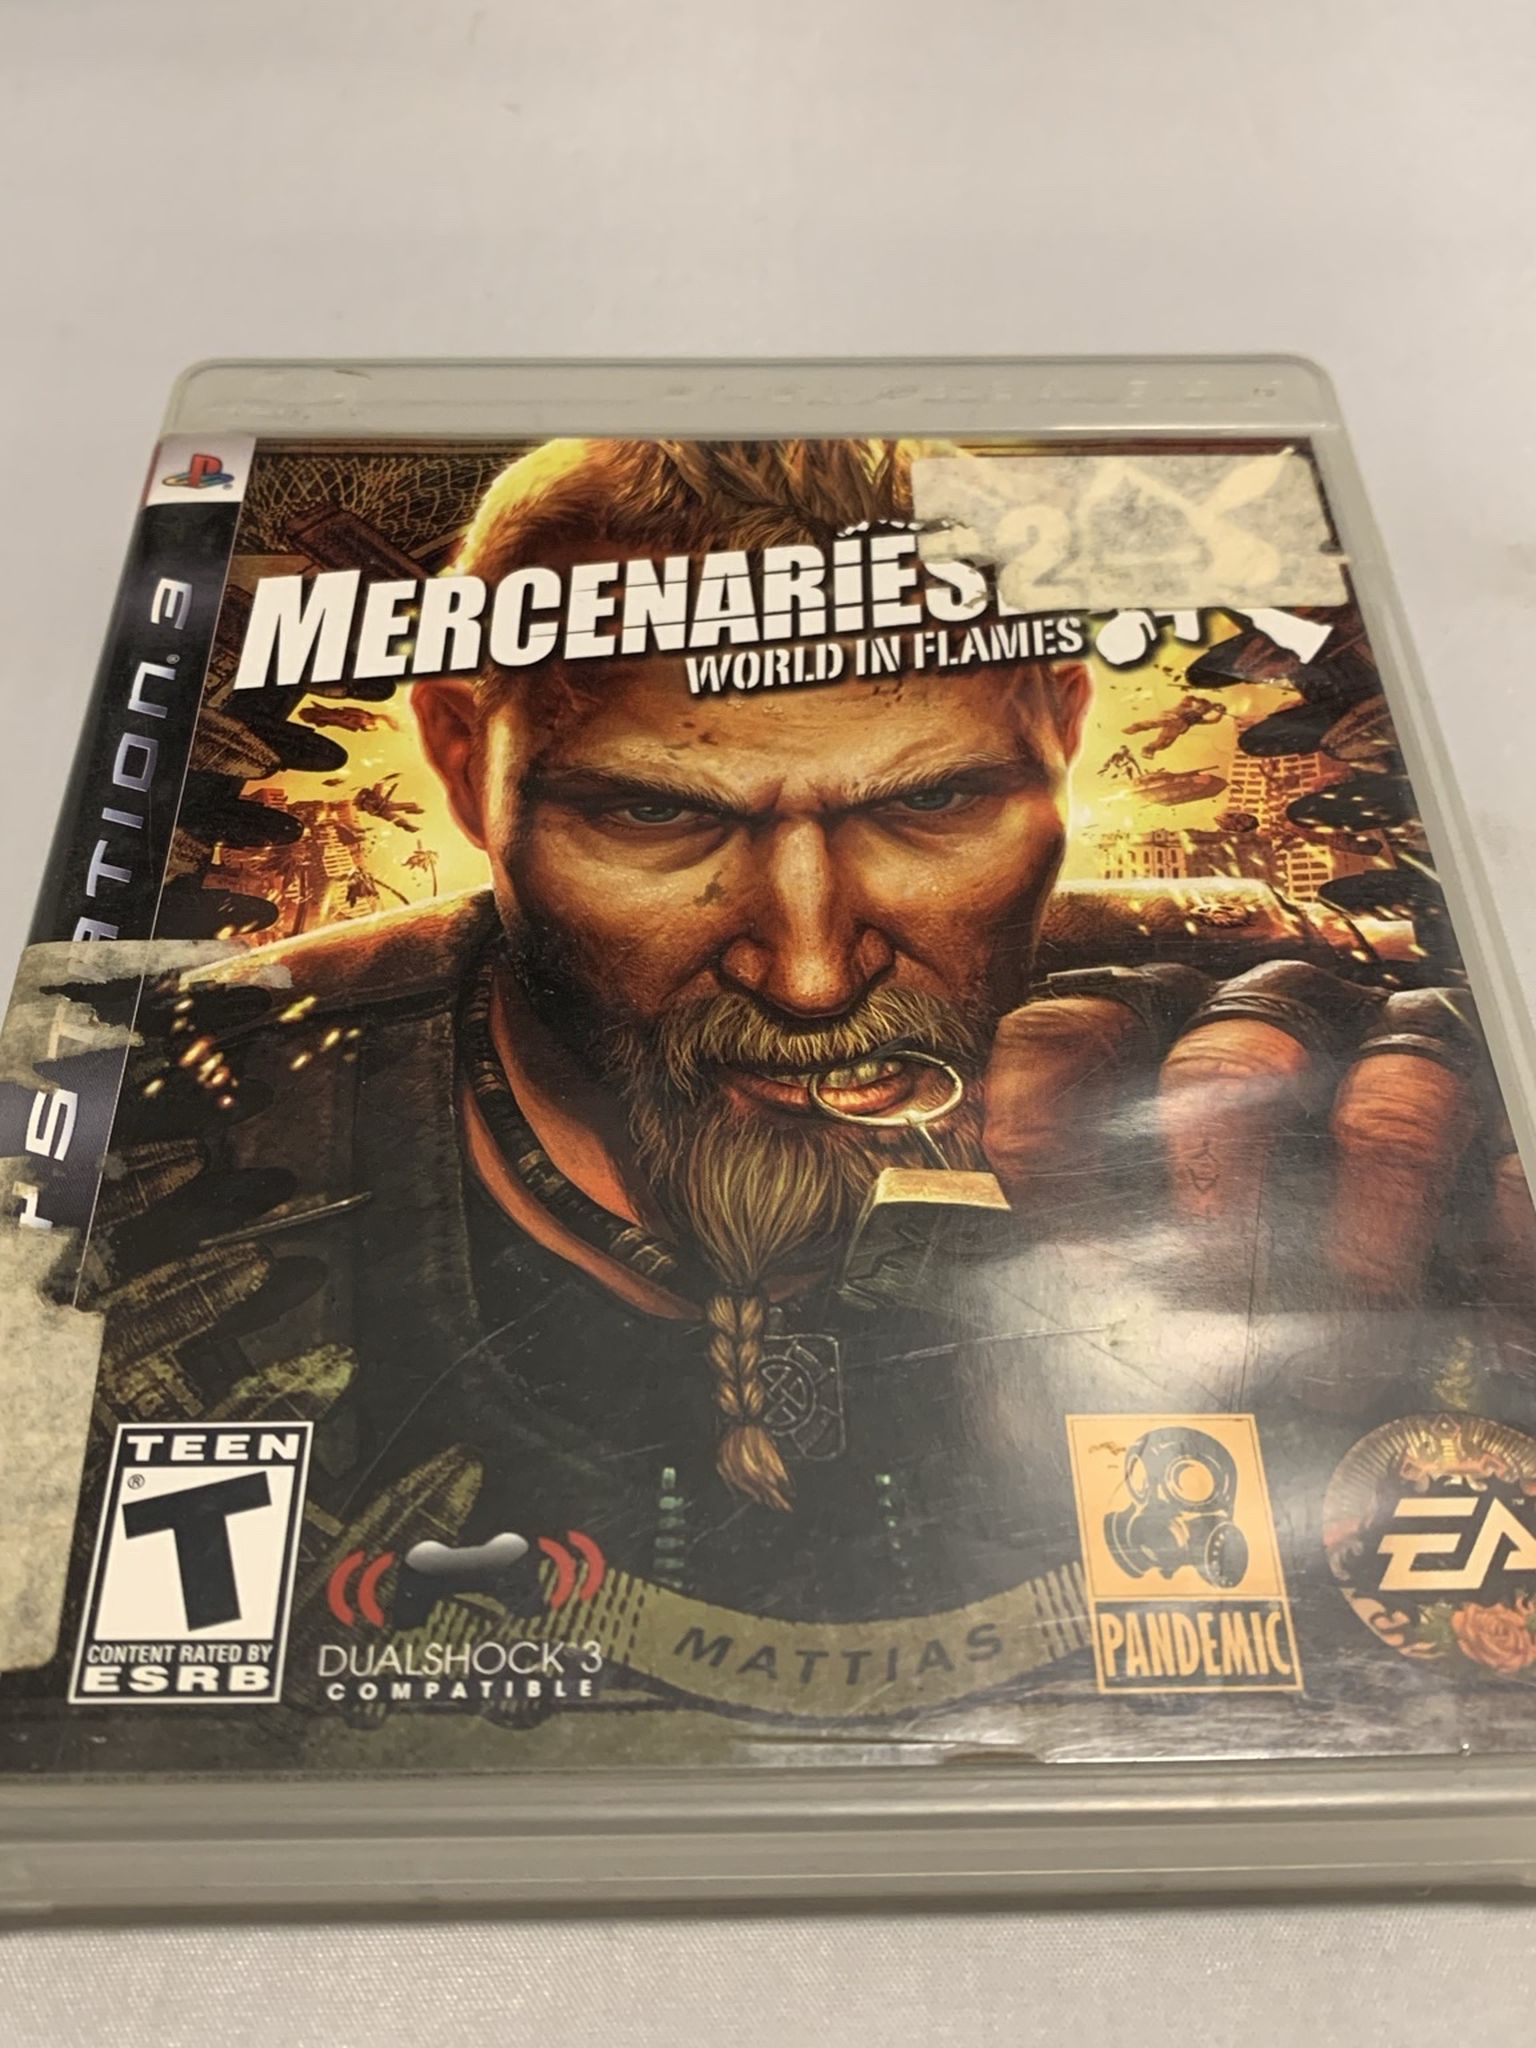 Mercenaries 2 For PlayStation 3 PS3 Complete CIB Video Game